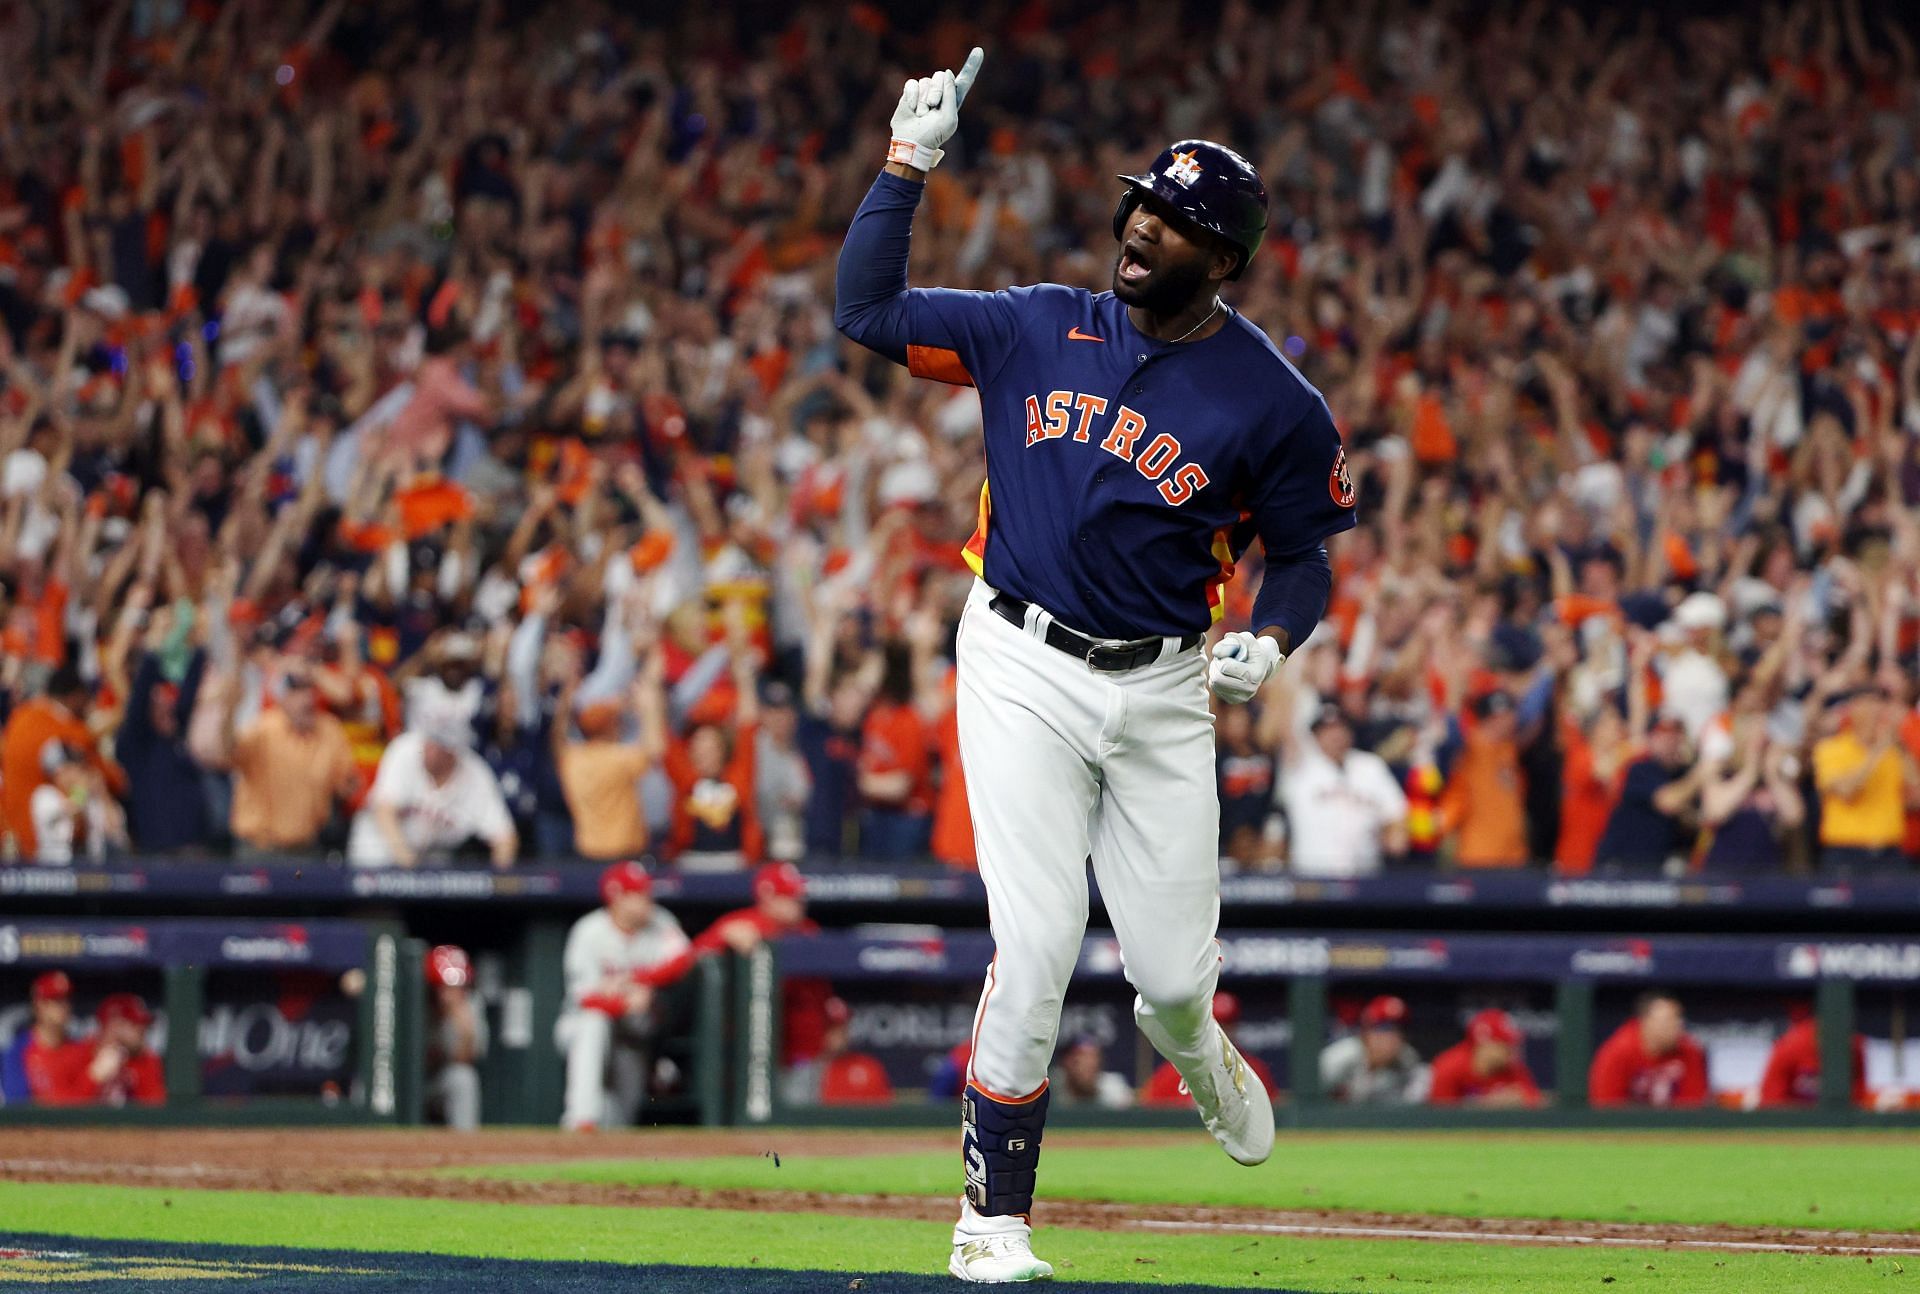 MLB analysts think that Houston Astros’ players can bring home some serious hardware in 2023: “Yordan Alvarez MVP”